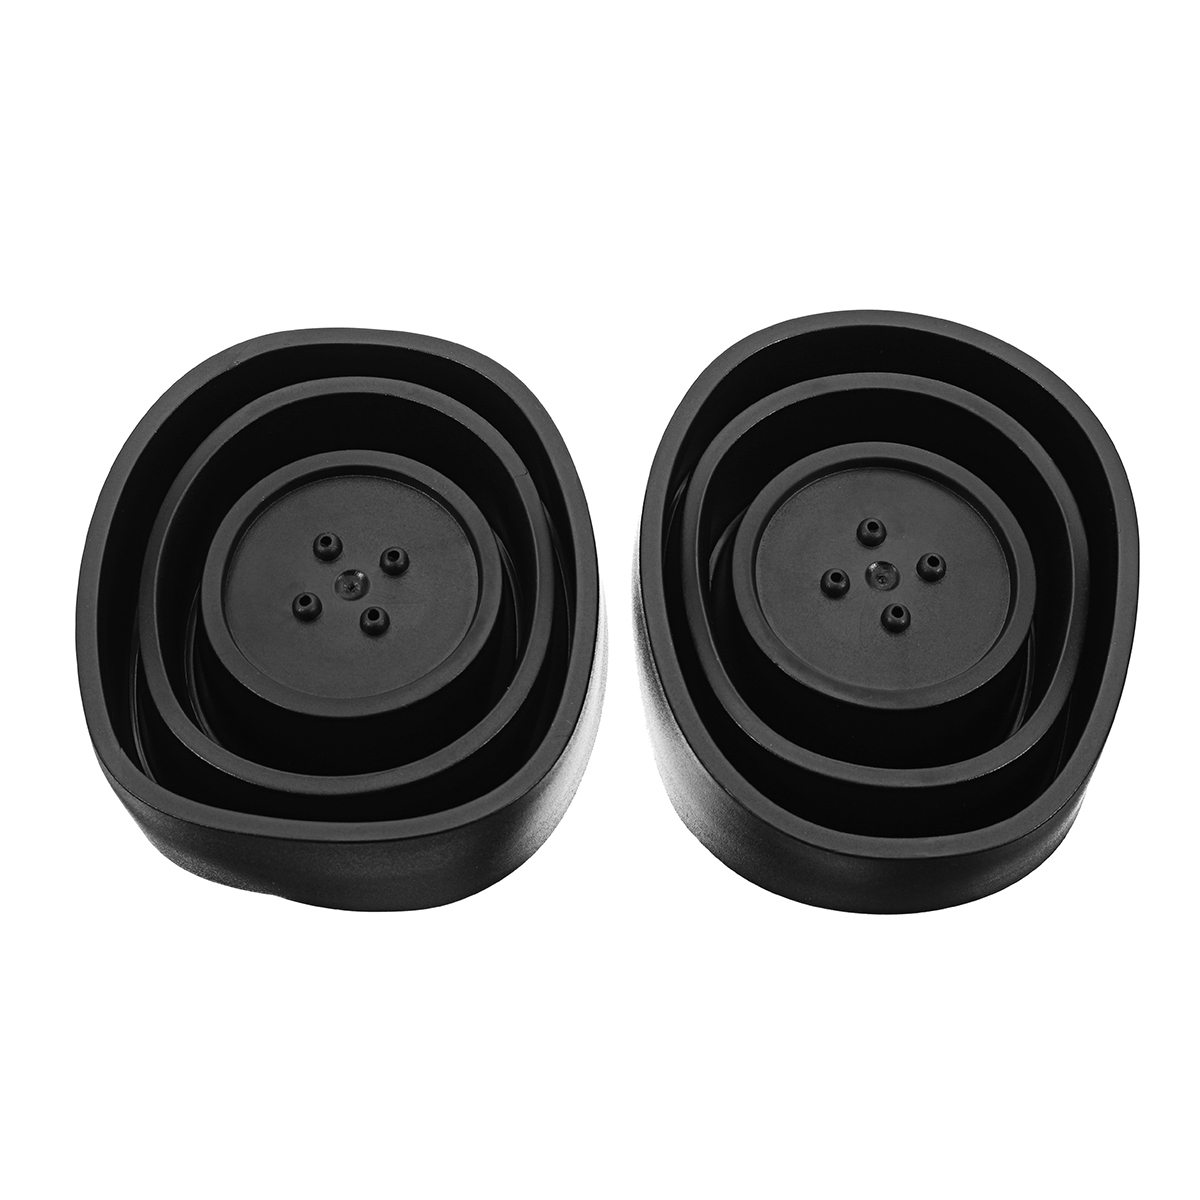 LED HID Dustproof Housing Seal Cap Cover for 55Mm/70Mm/80Mm/90Mm/95Mm Headlight - Auto GoShop